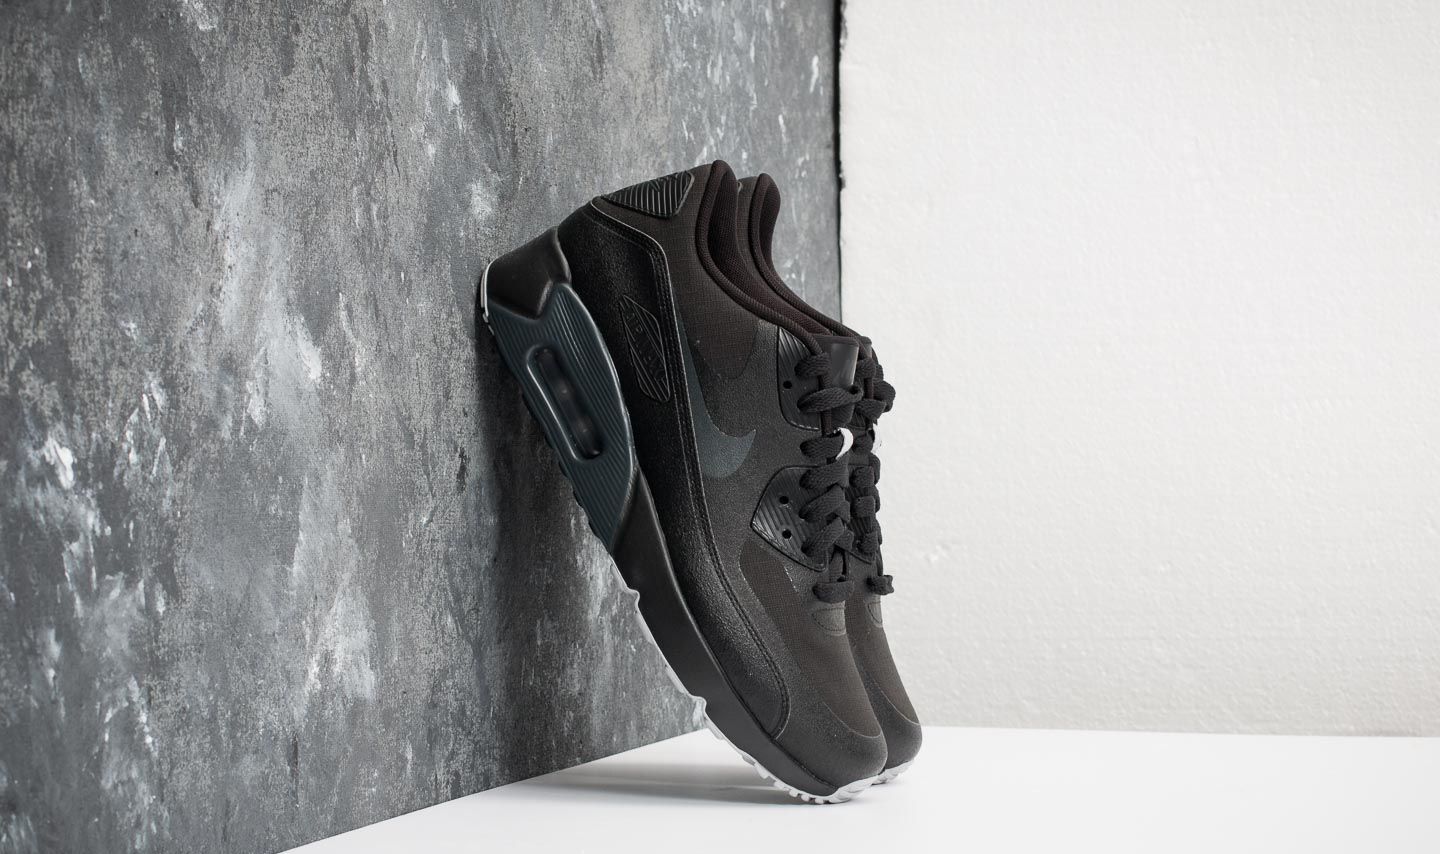 Men's shoes Nike Air Max 90 Ultra 2.0 WE Black/ Anthracite-Wolf Grey